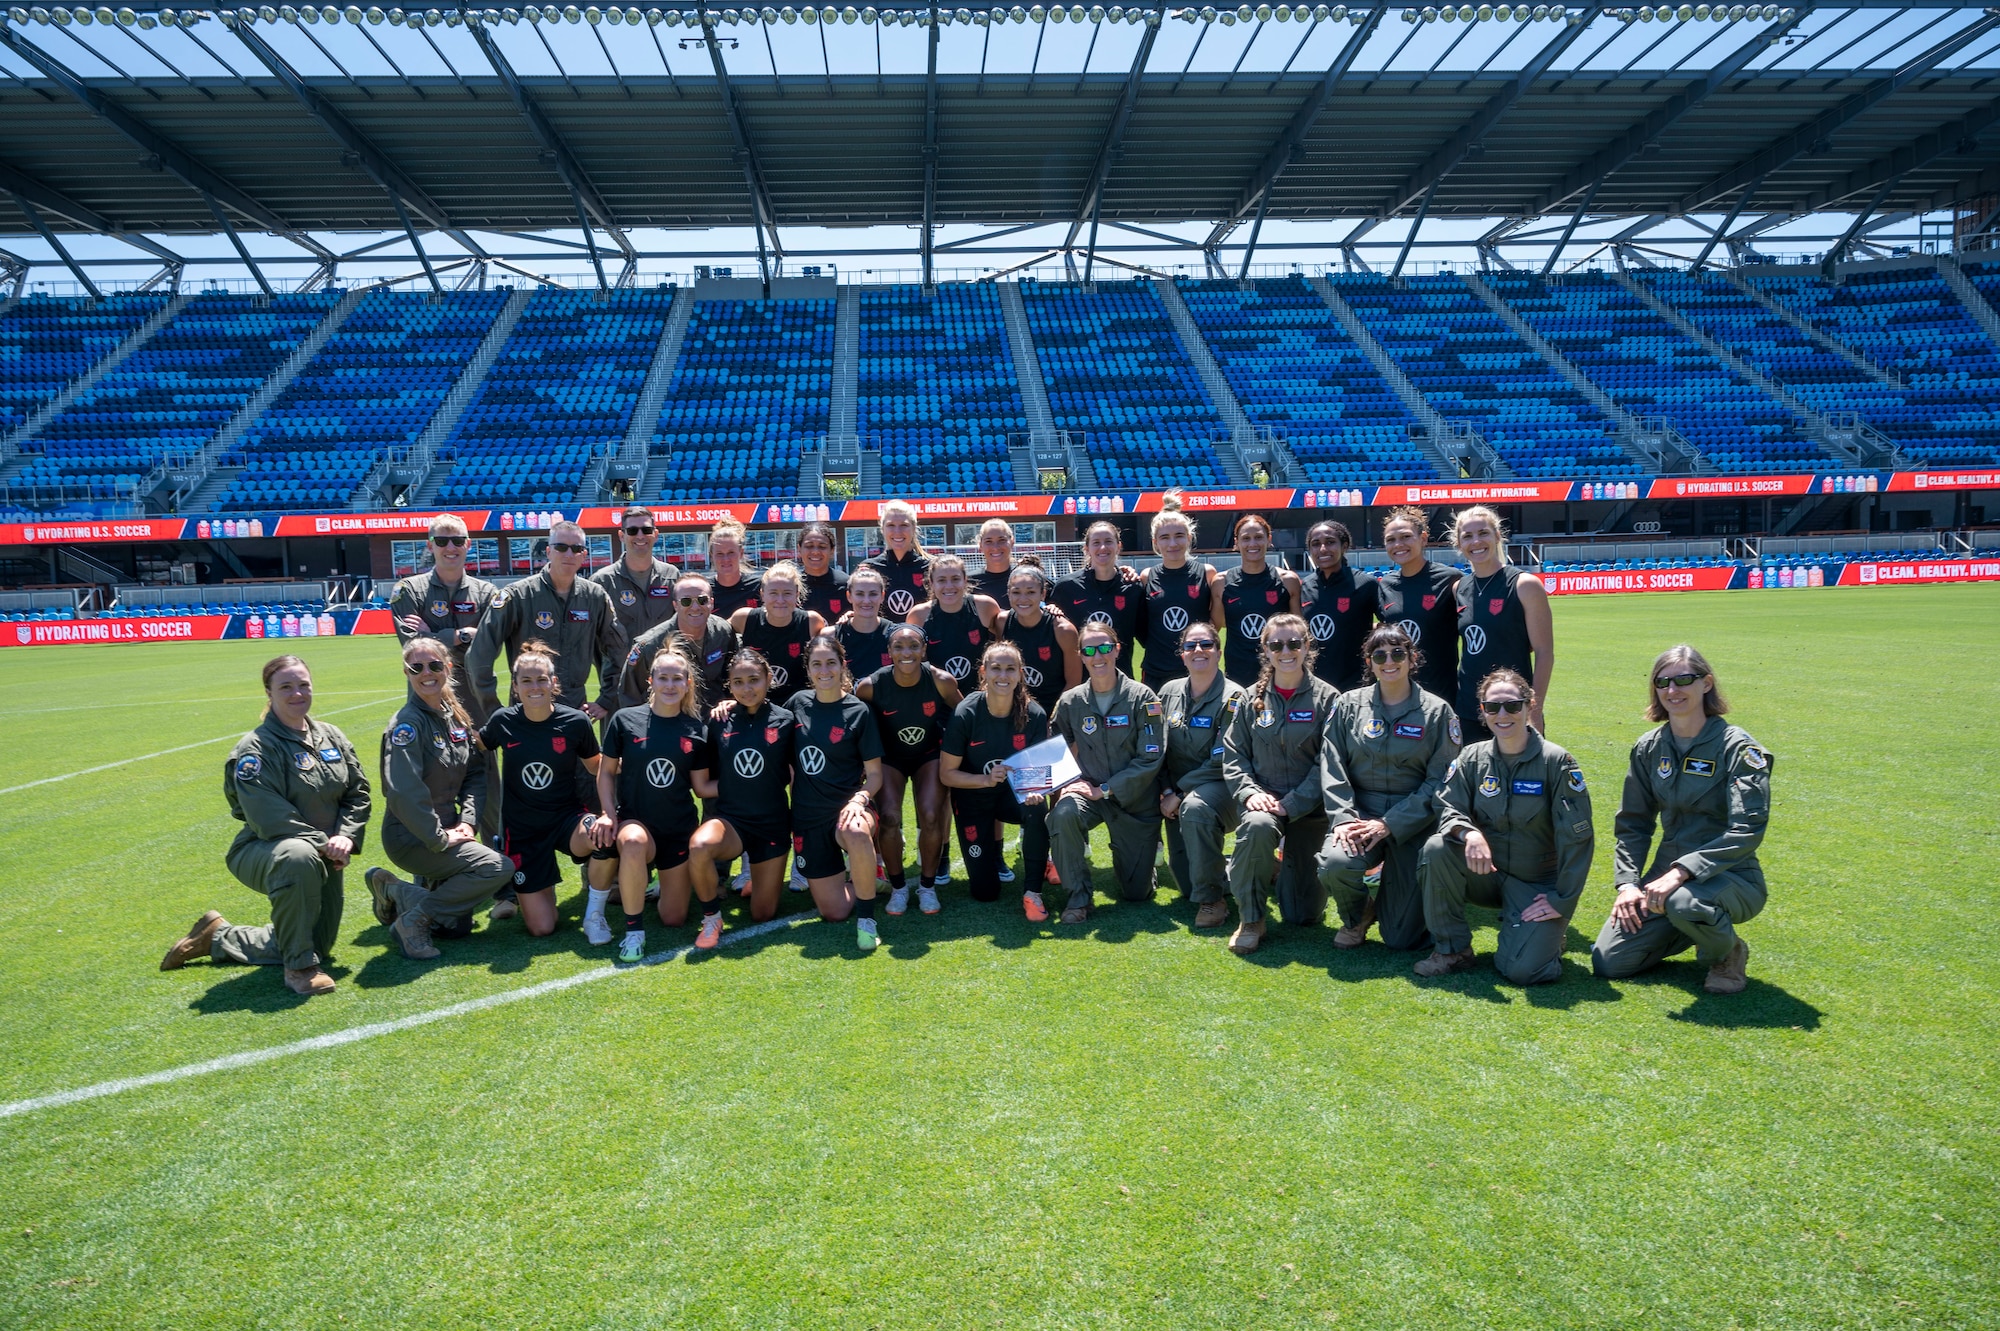 Members from the 412th Operations Group pose for a photo with the U.S. Women's National Team. Team Edwards sent an all female crew from the 412th Operations Group to conduct a special flyover for the National Women's Soccer League at PayPal Park July 9 in San Jose, California.